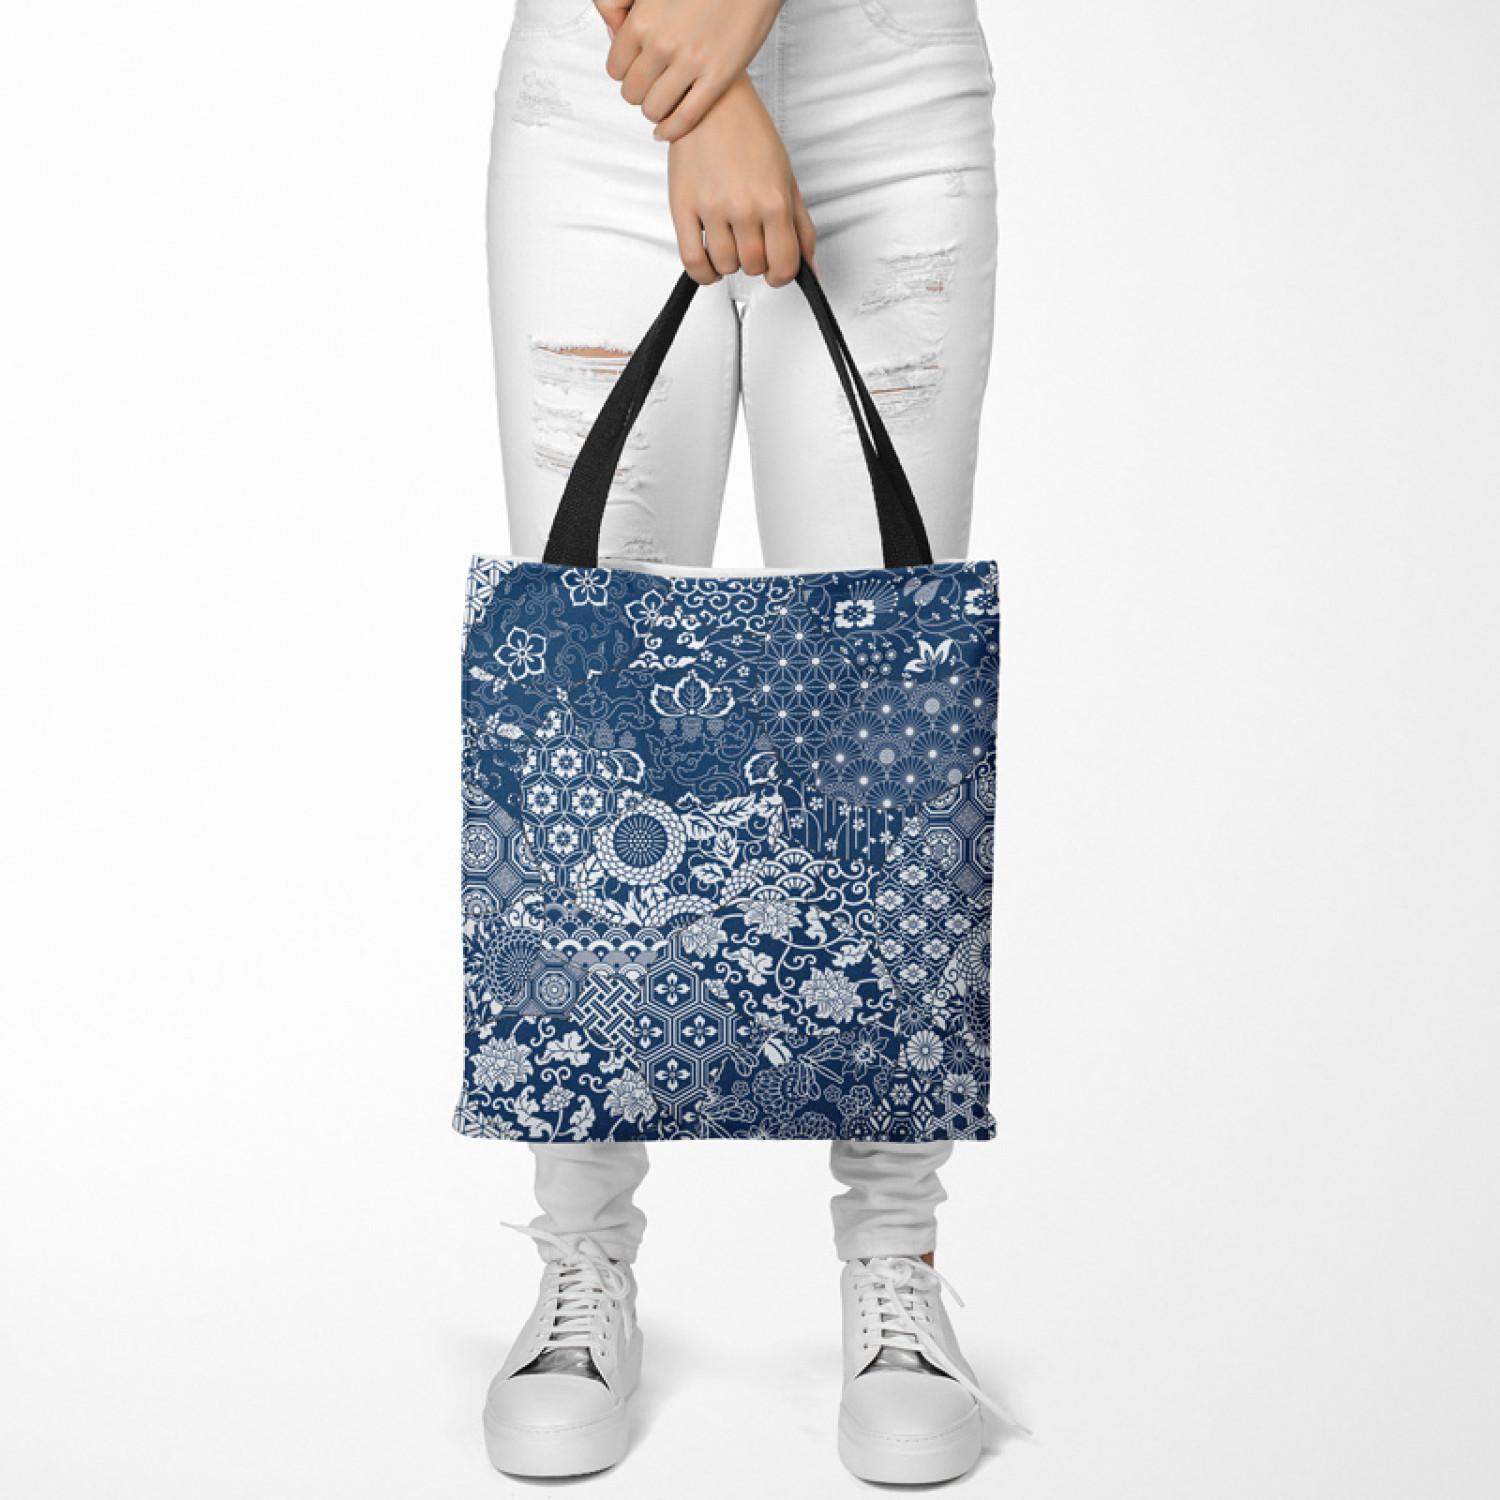 Shopping Bag Floral mosaic - composition in shades of blue and white